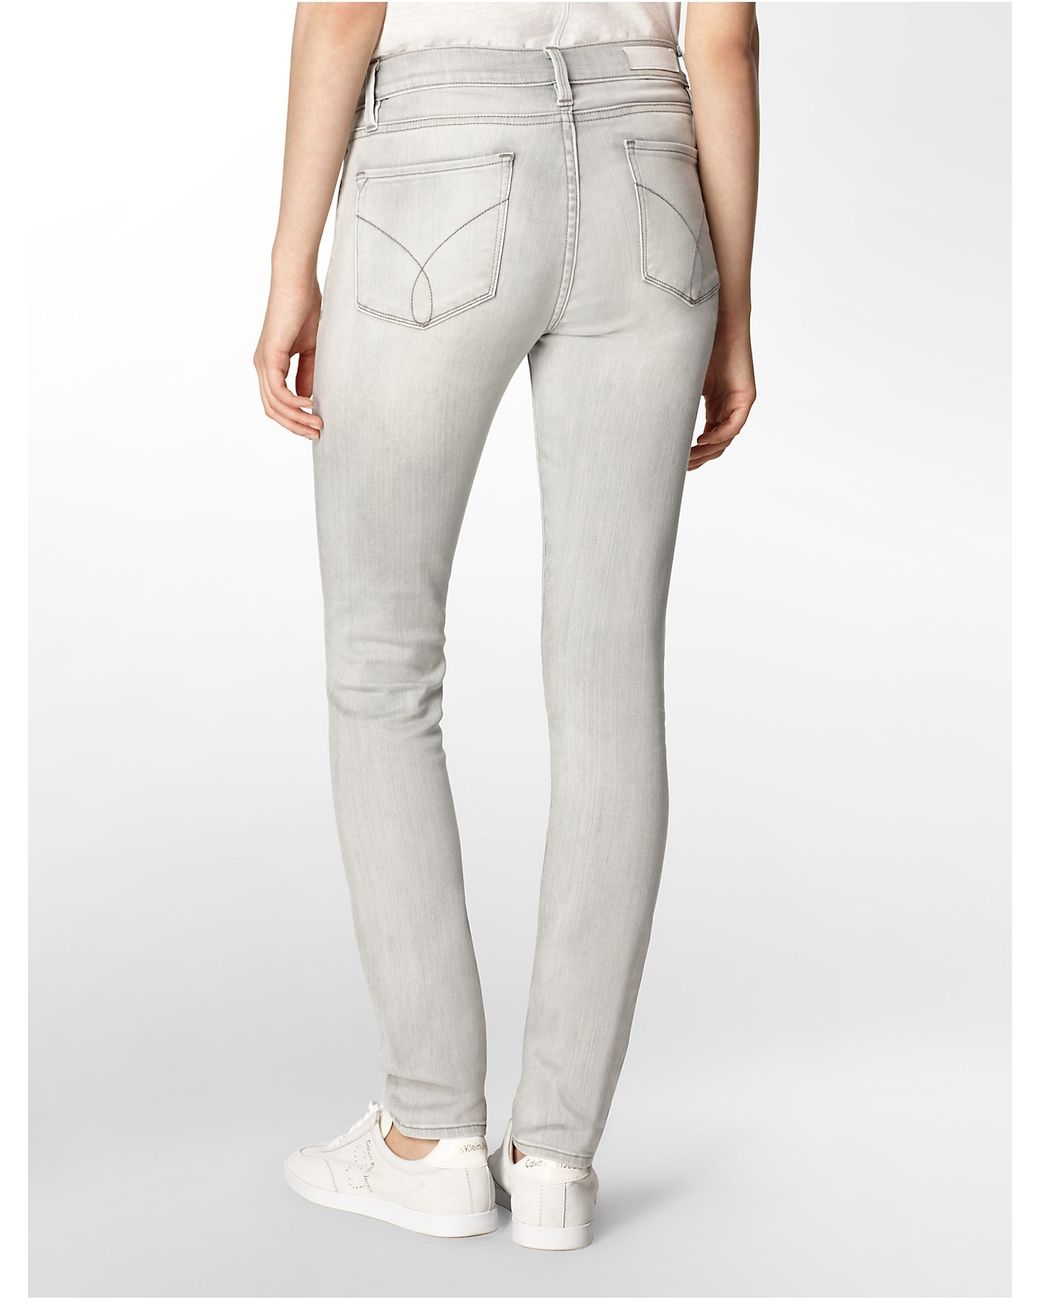 Calvin Klein Jeans Ultimate Skinny Light Grey Wash Jeans in Gray | Lyst